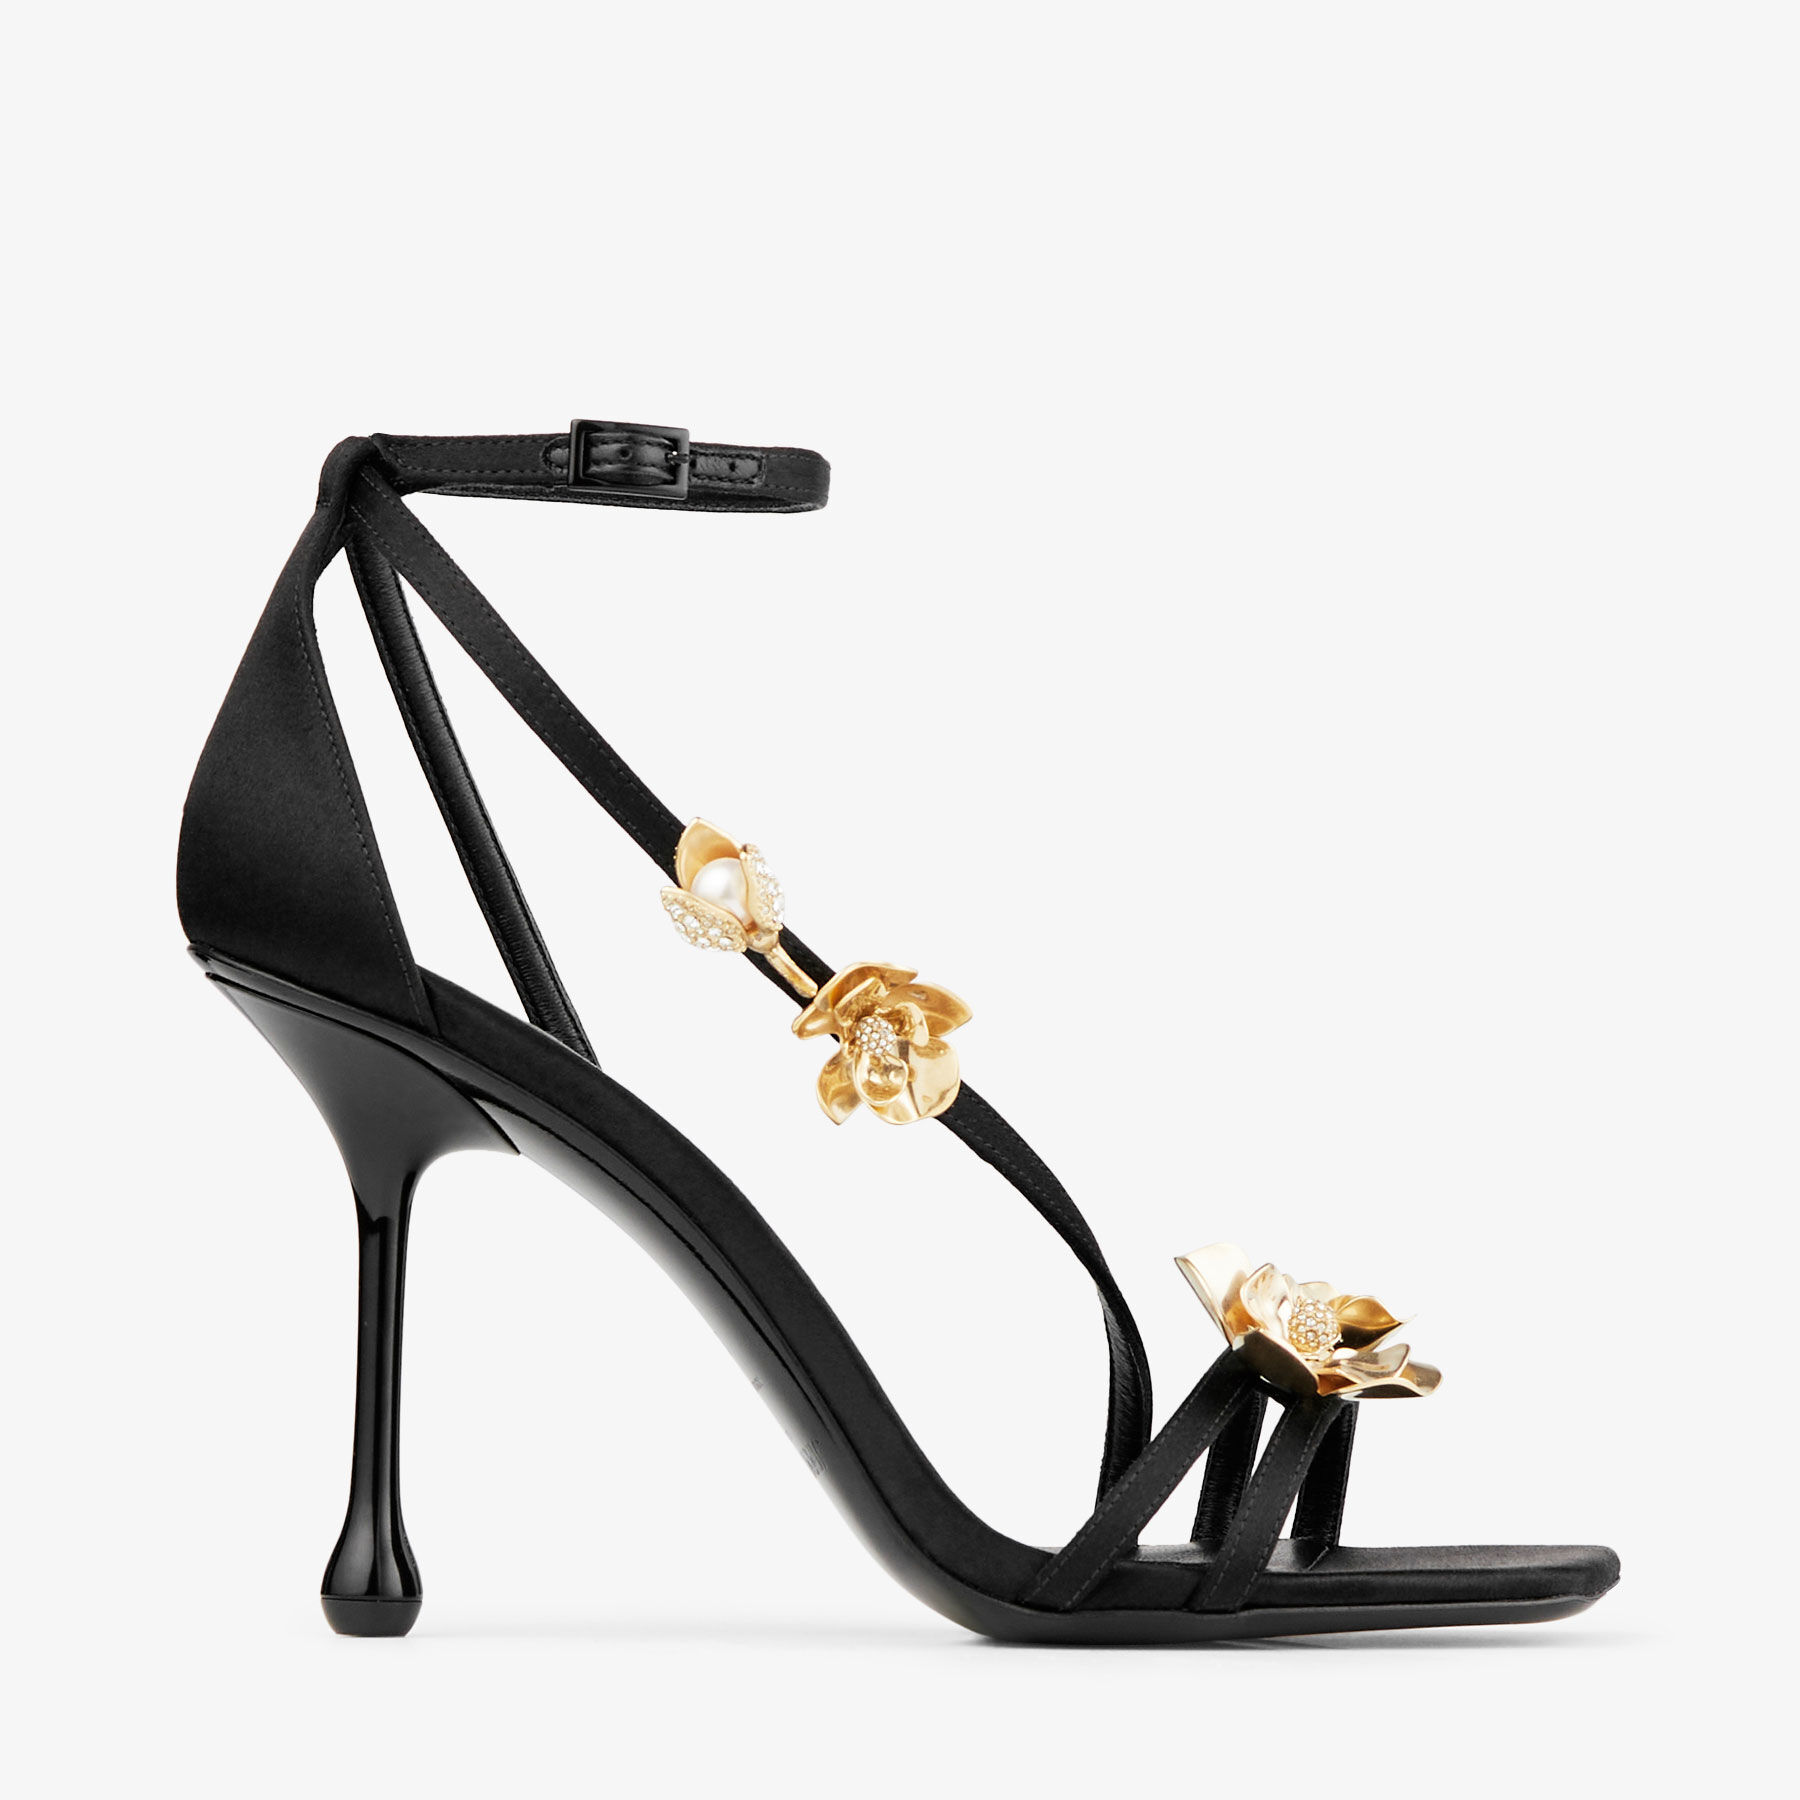 ZEA 95 | Black Satin Sandals with Metal Flowers | New Collection 